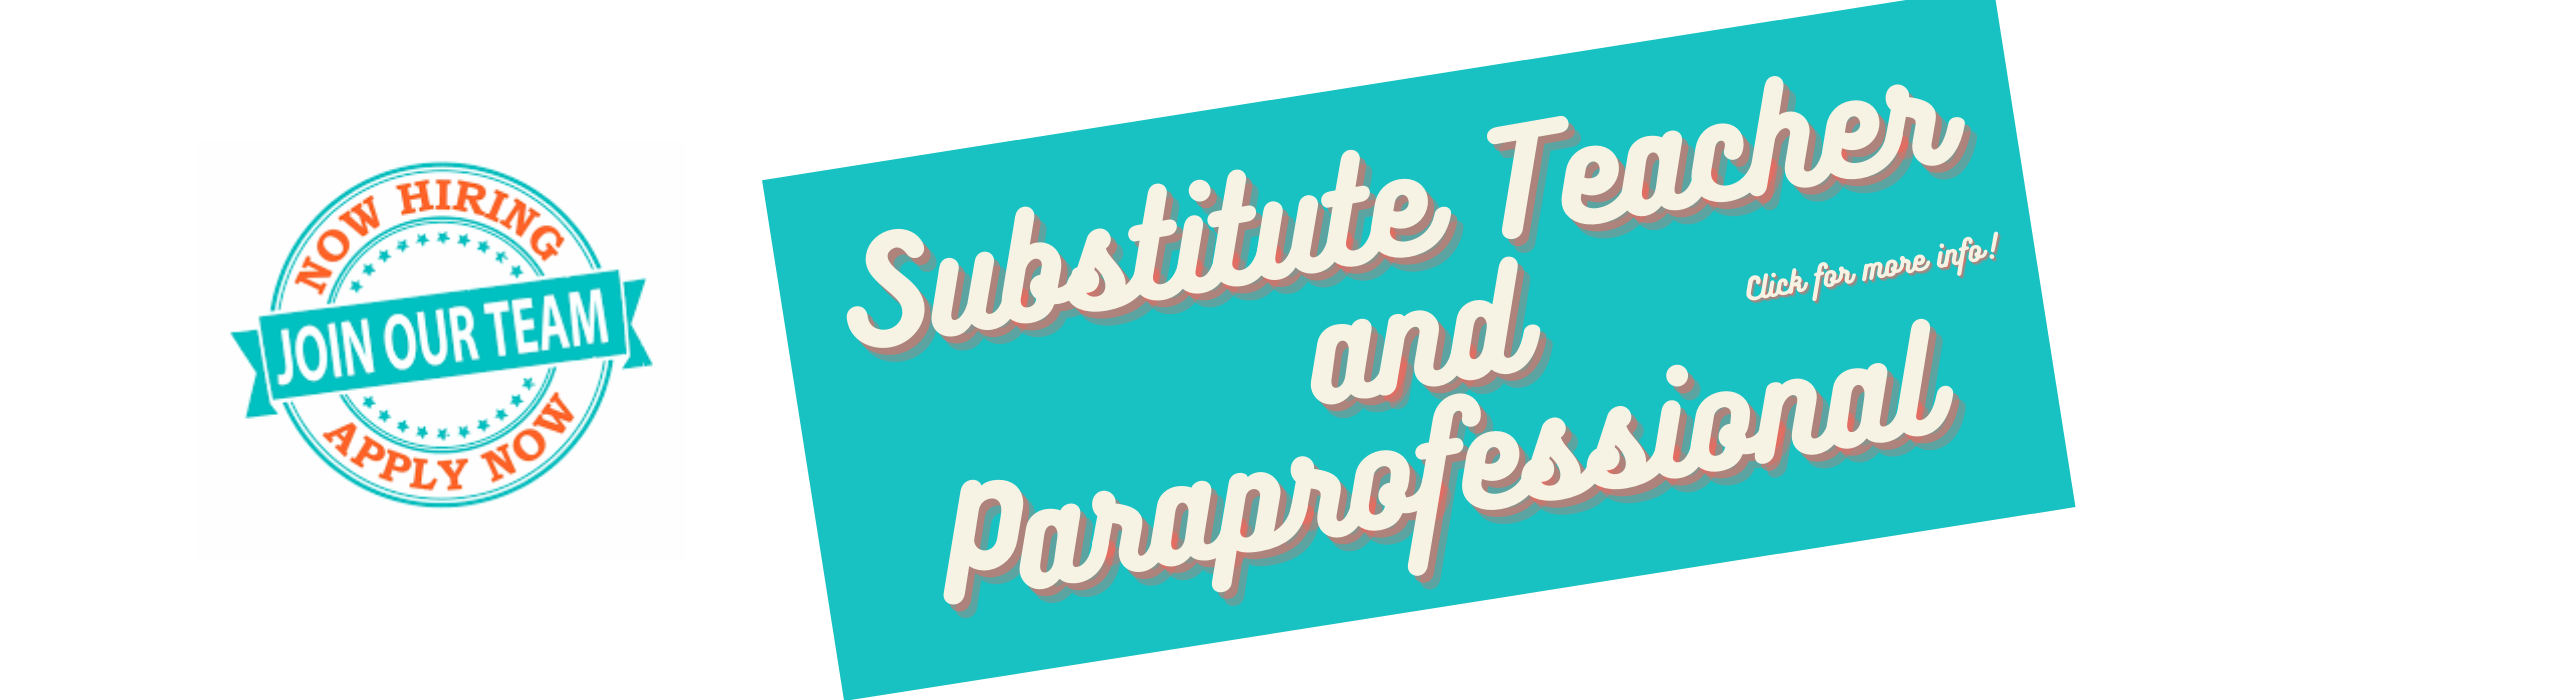 We are hiring! Substitute teacher and paraprofessional. Click Here for more info